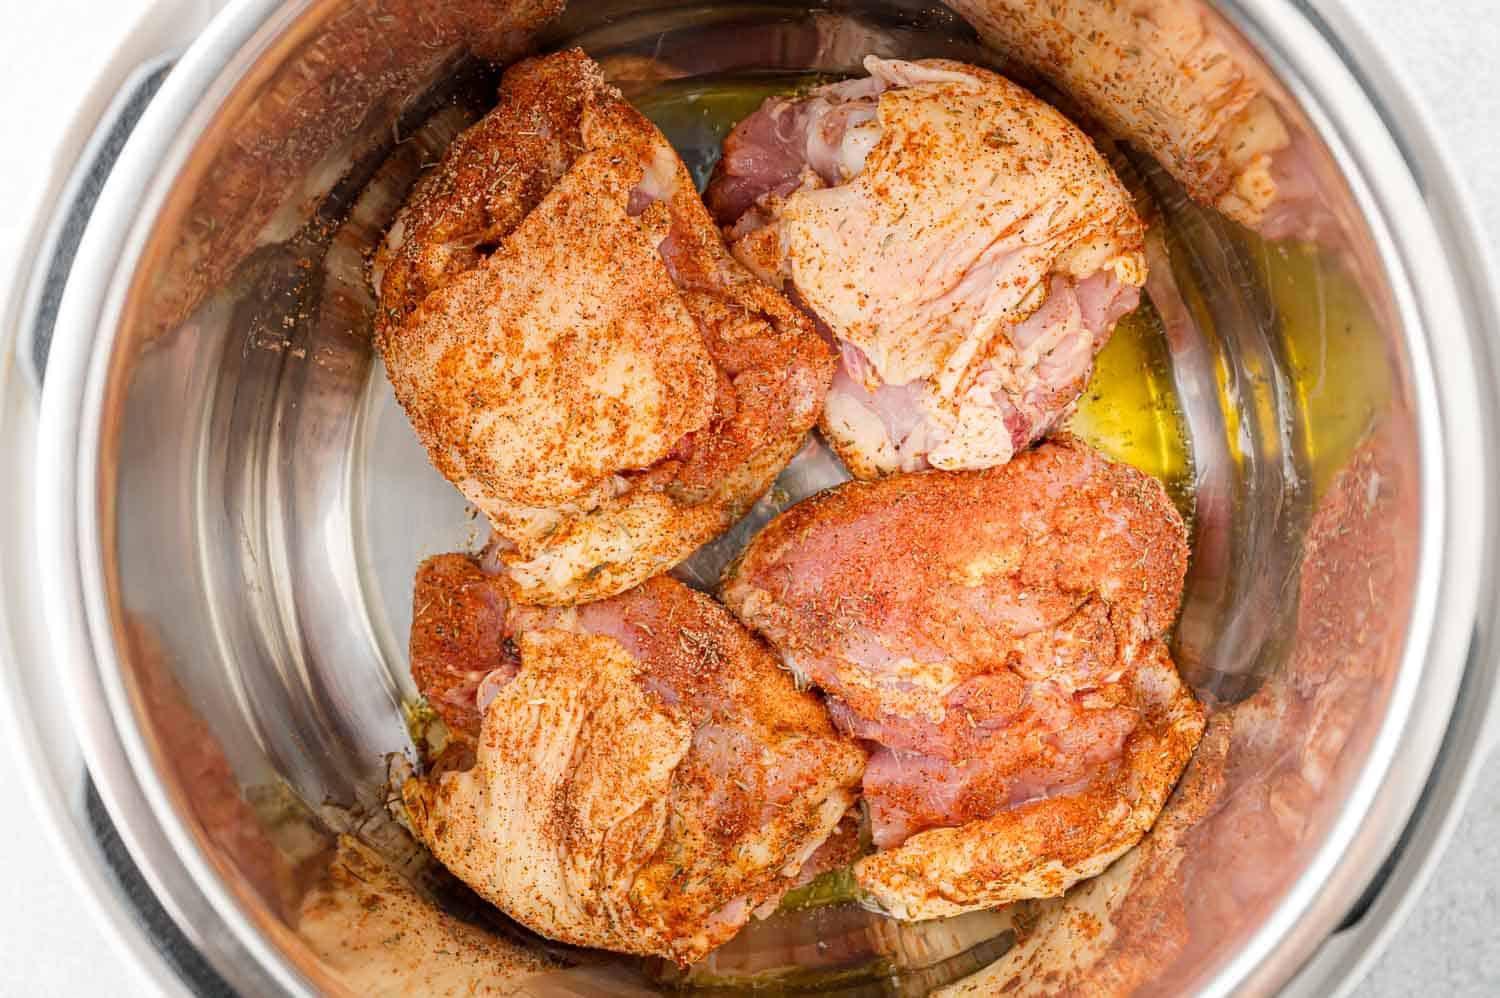 Chicken thighs being browned on the first side in the Instant Pot.